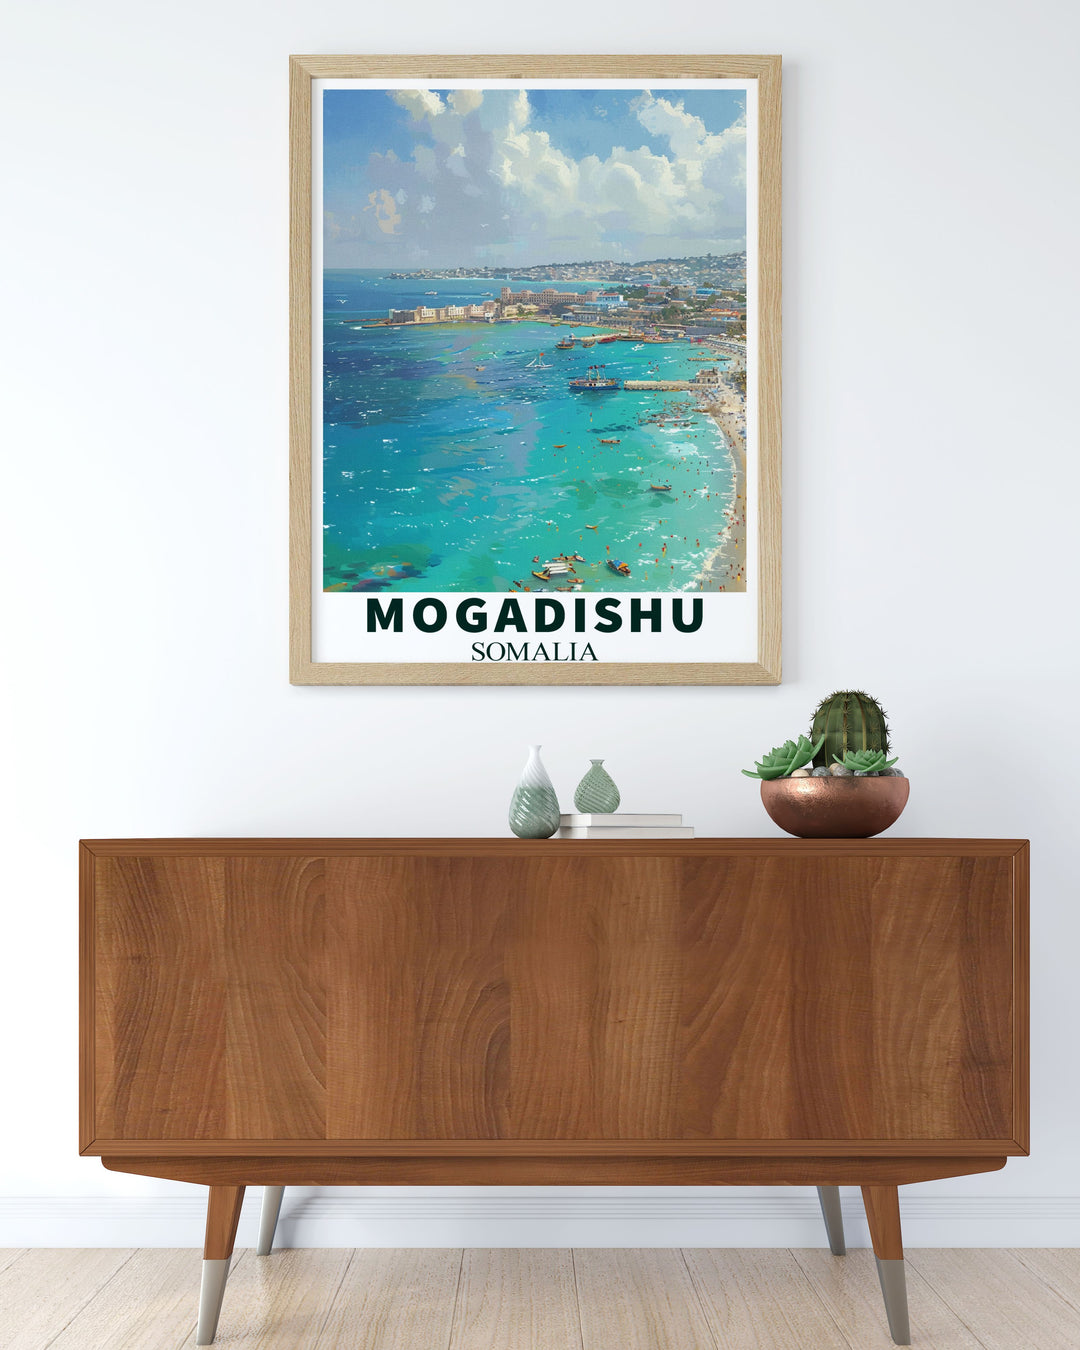 This travel poster highlights the dynamic culture of Mogadishu, inviting viewers to experience the vibrant beach scenes and lively atmosphere of Somalias capital city.